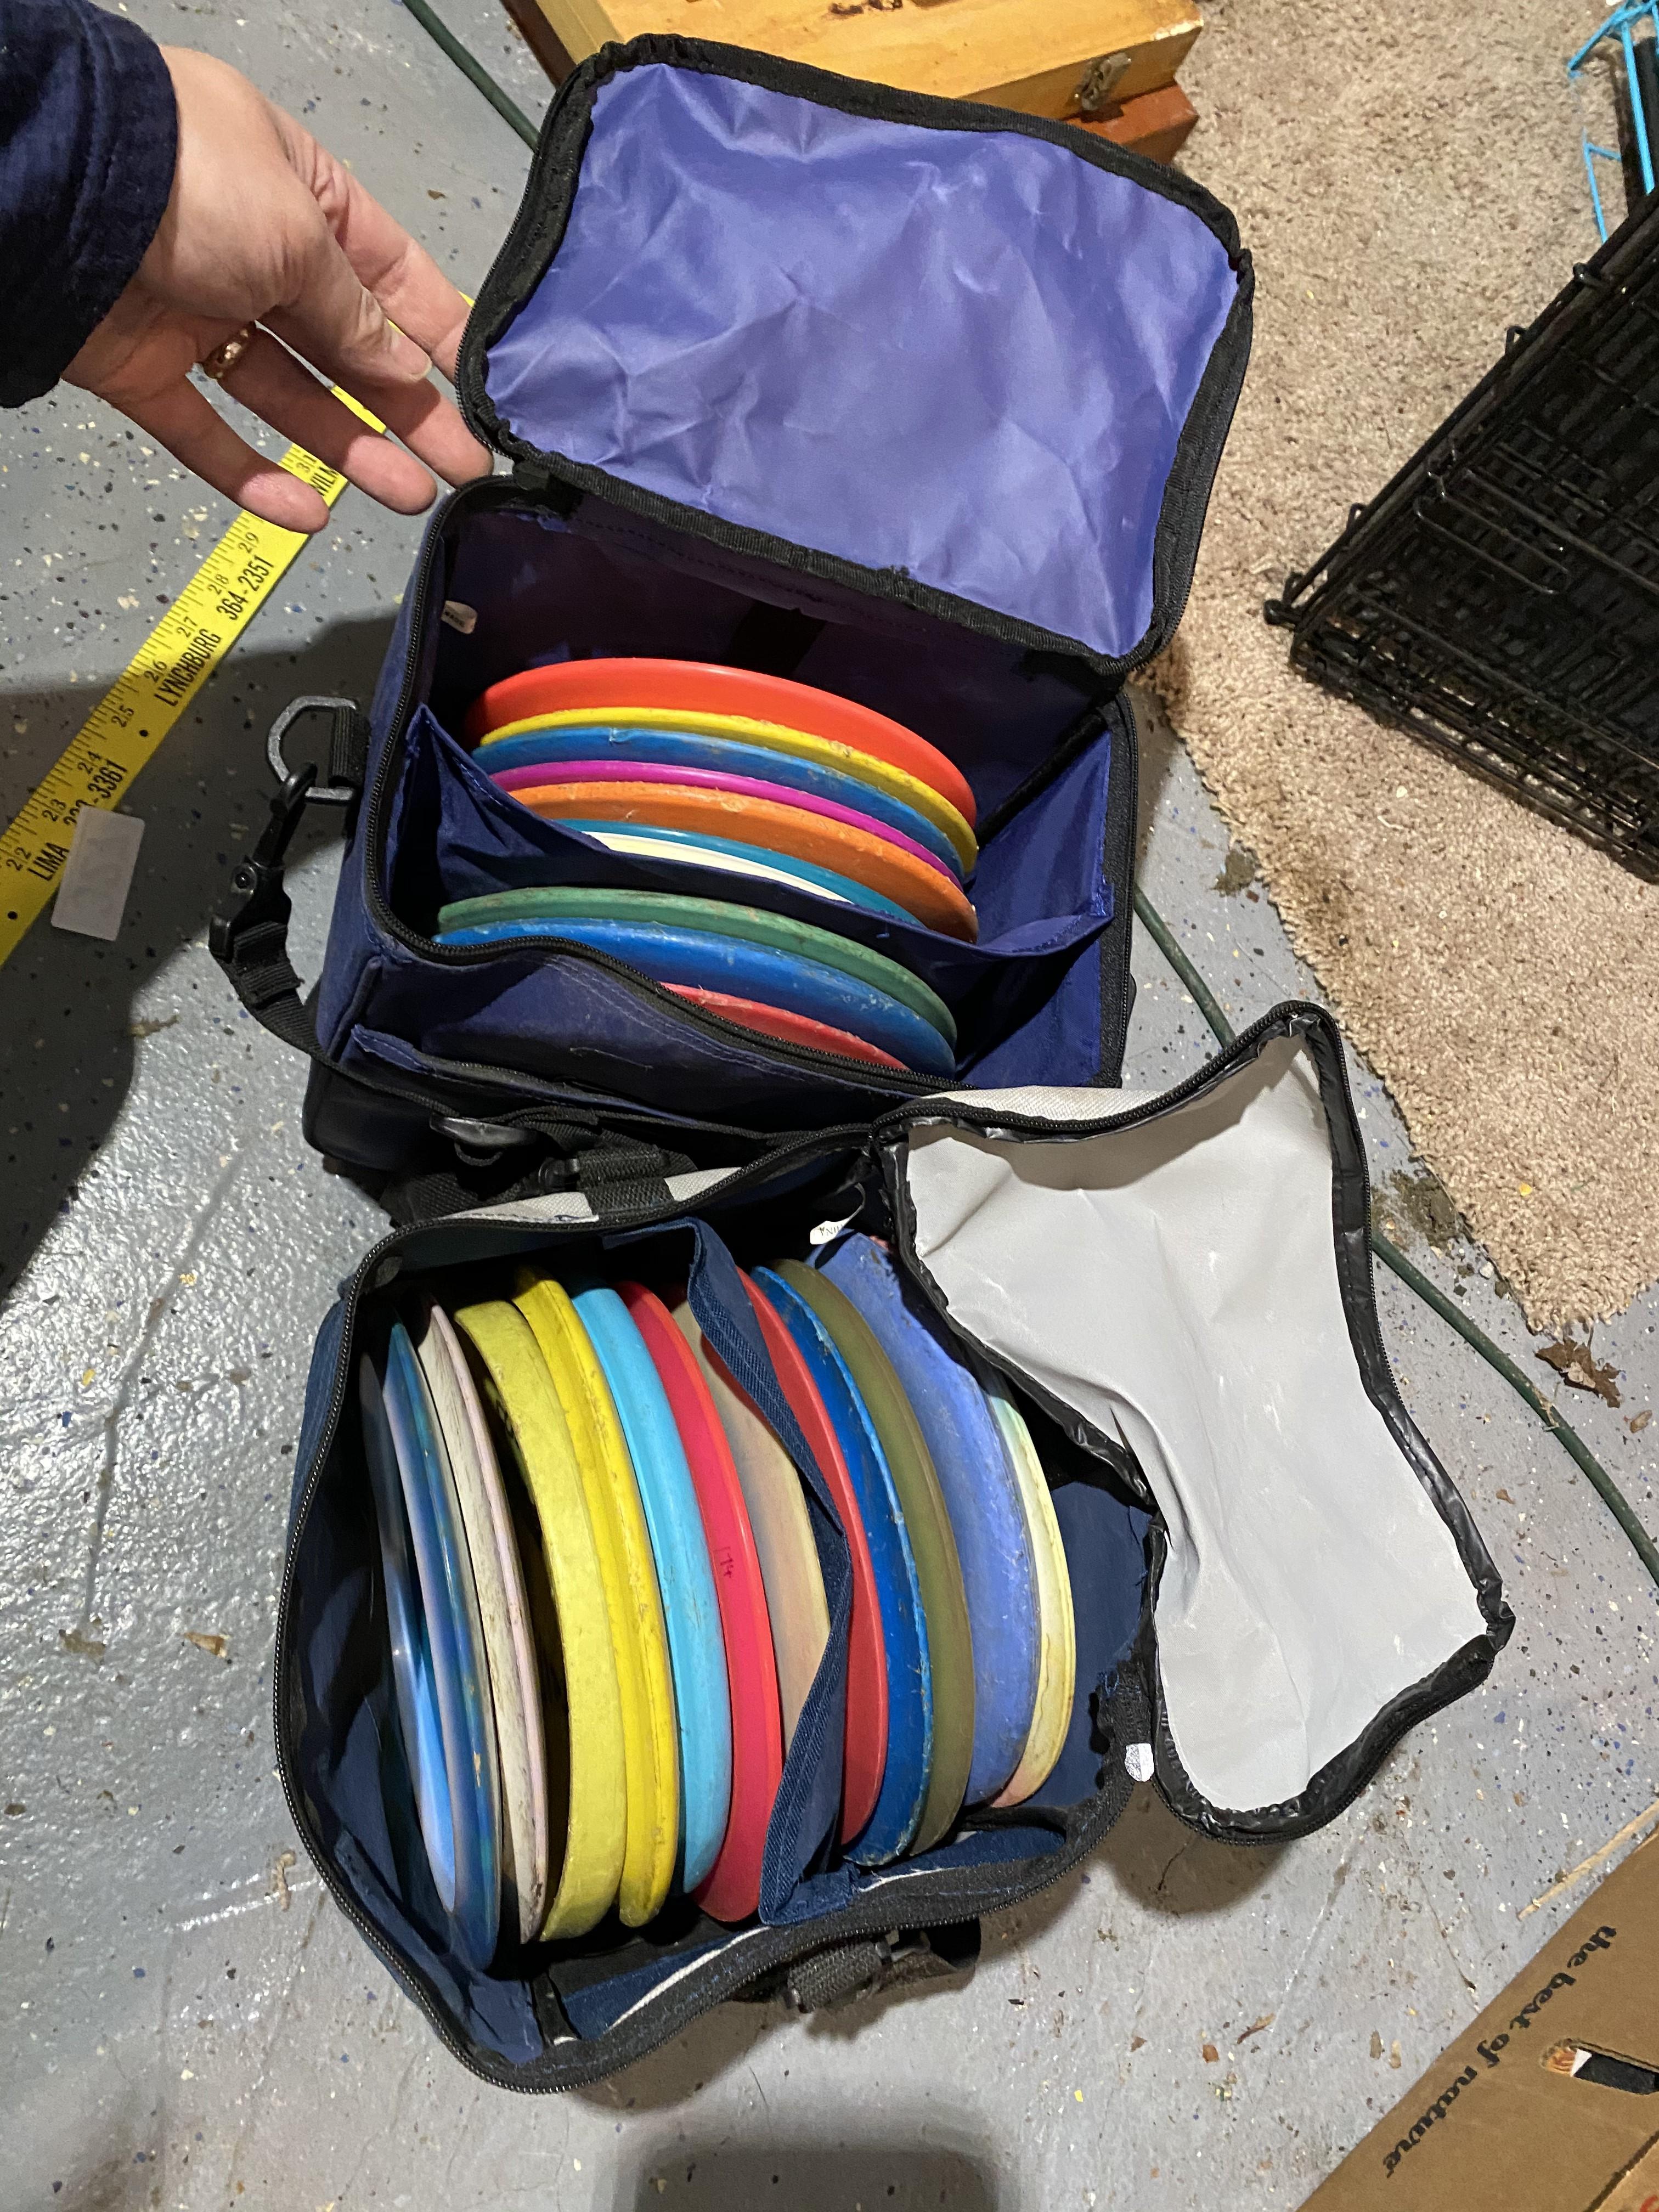 Large lot of assorted Disc Golf Discs